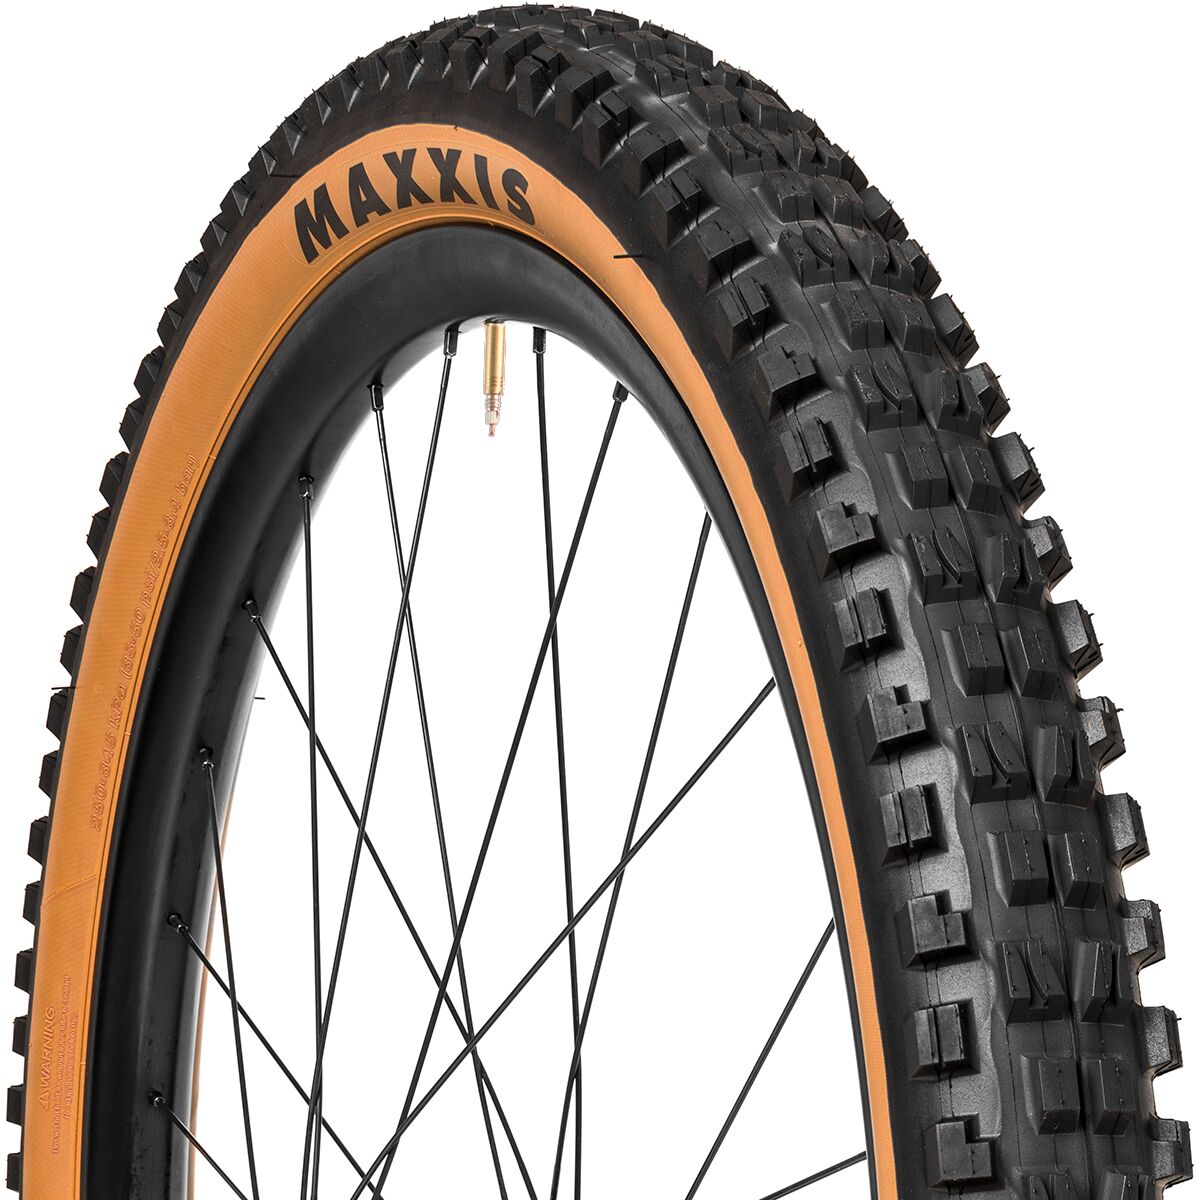 Maxxis Minion DHF Wide Trail Dual Compound/EXO/TR 27.5in Tire Tanwall/Dual Compound/EXO, 27.5x2.5